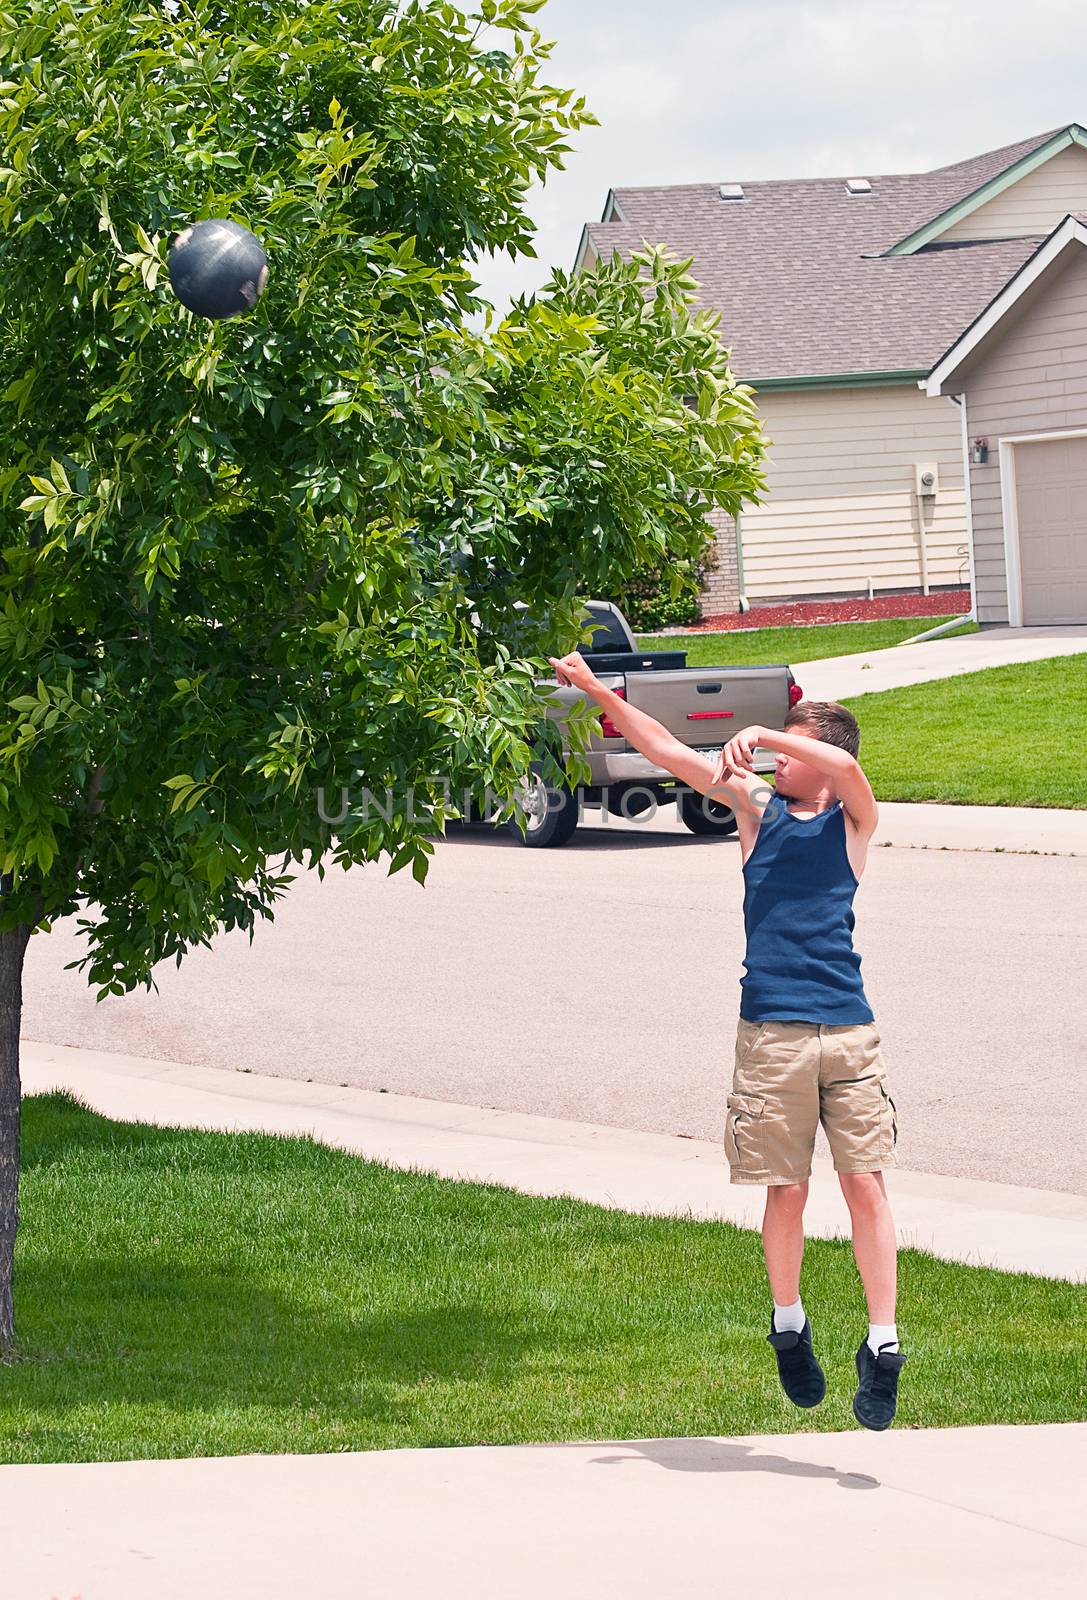 Shooting Hoops At Home by rcarner